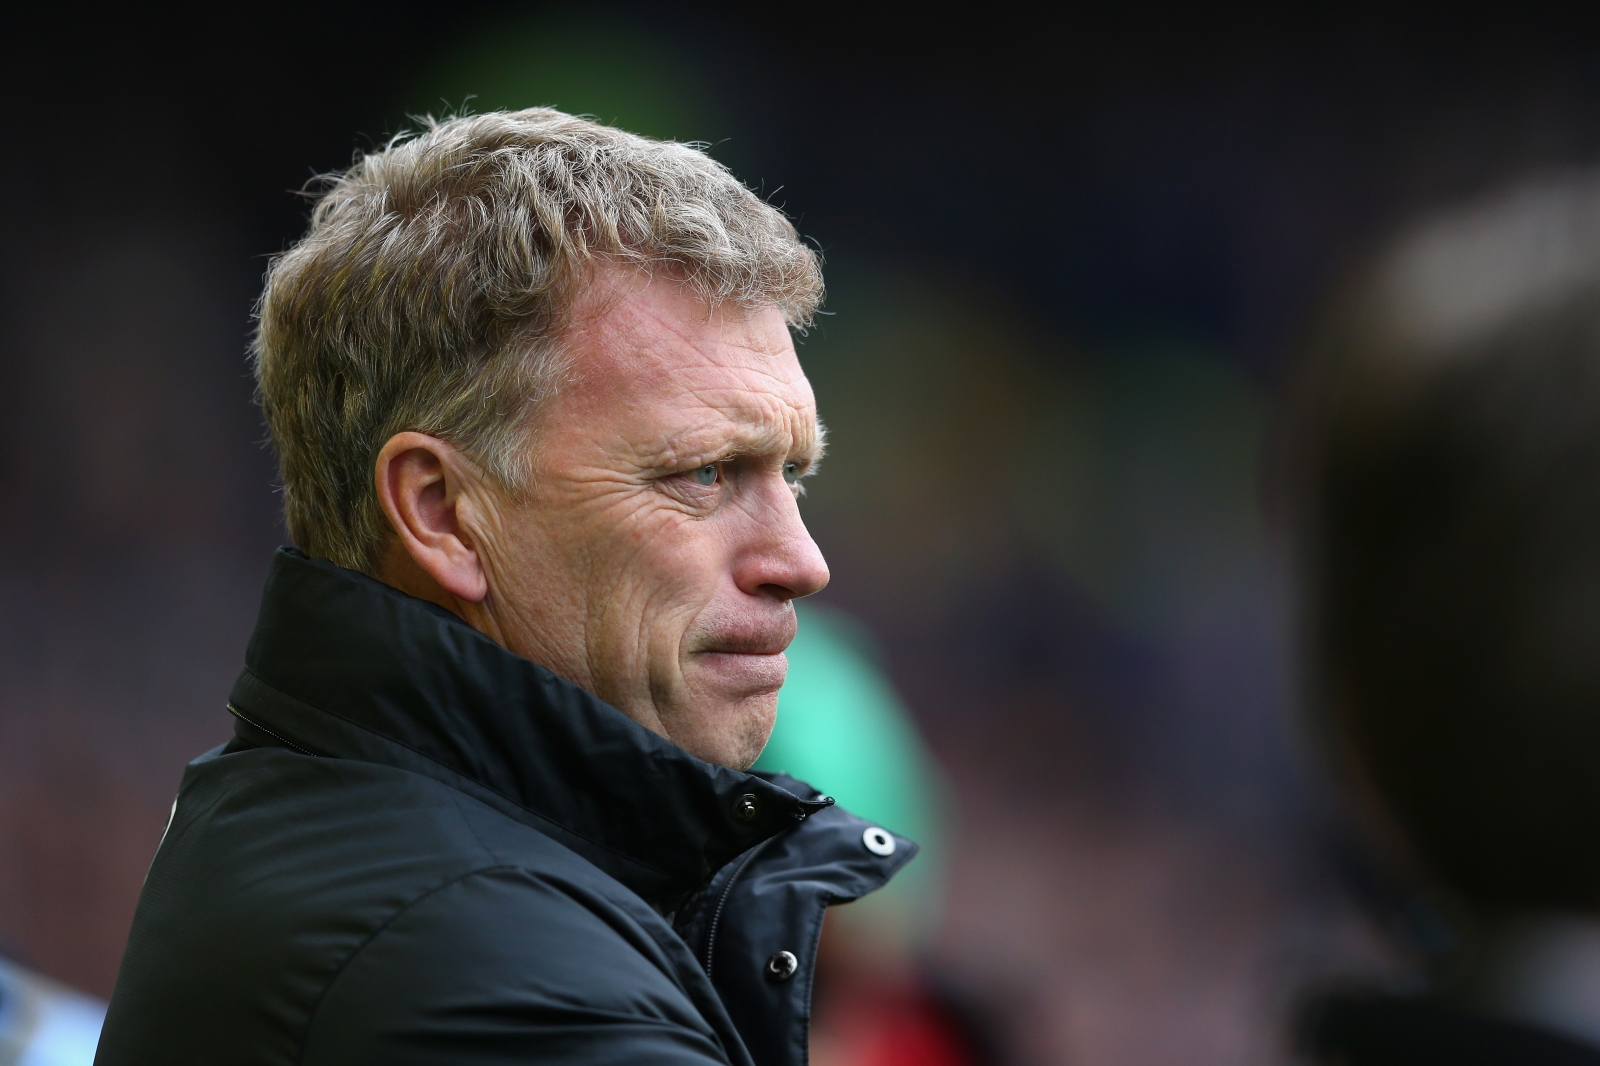 David Moyes Ready for Management Return After Manchester United Sacking